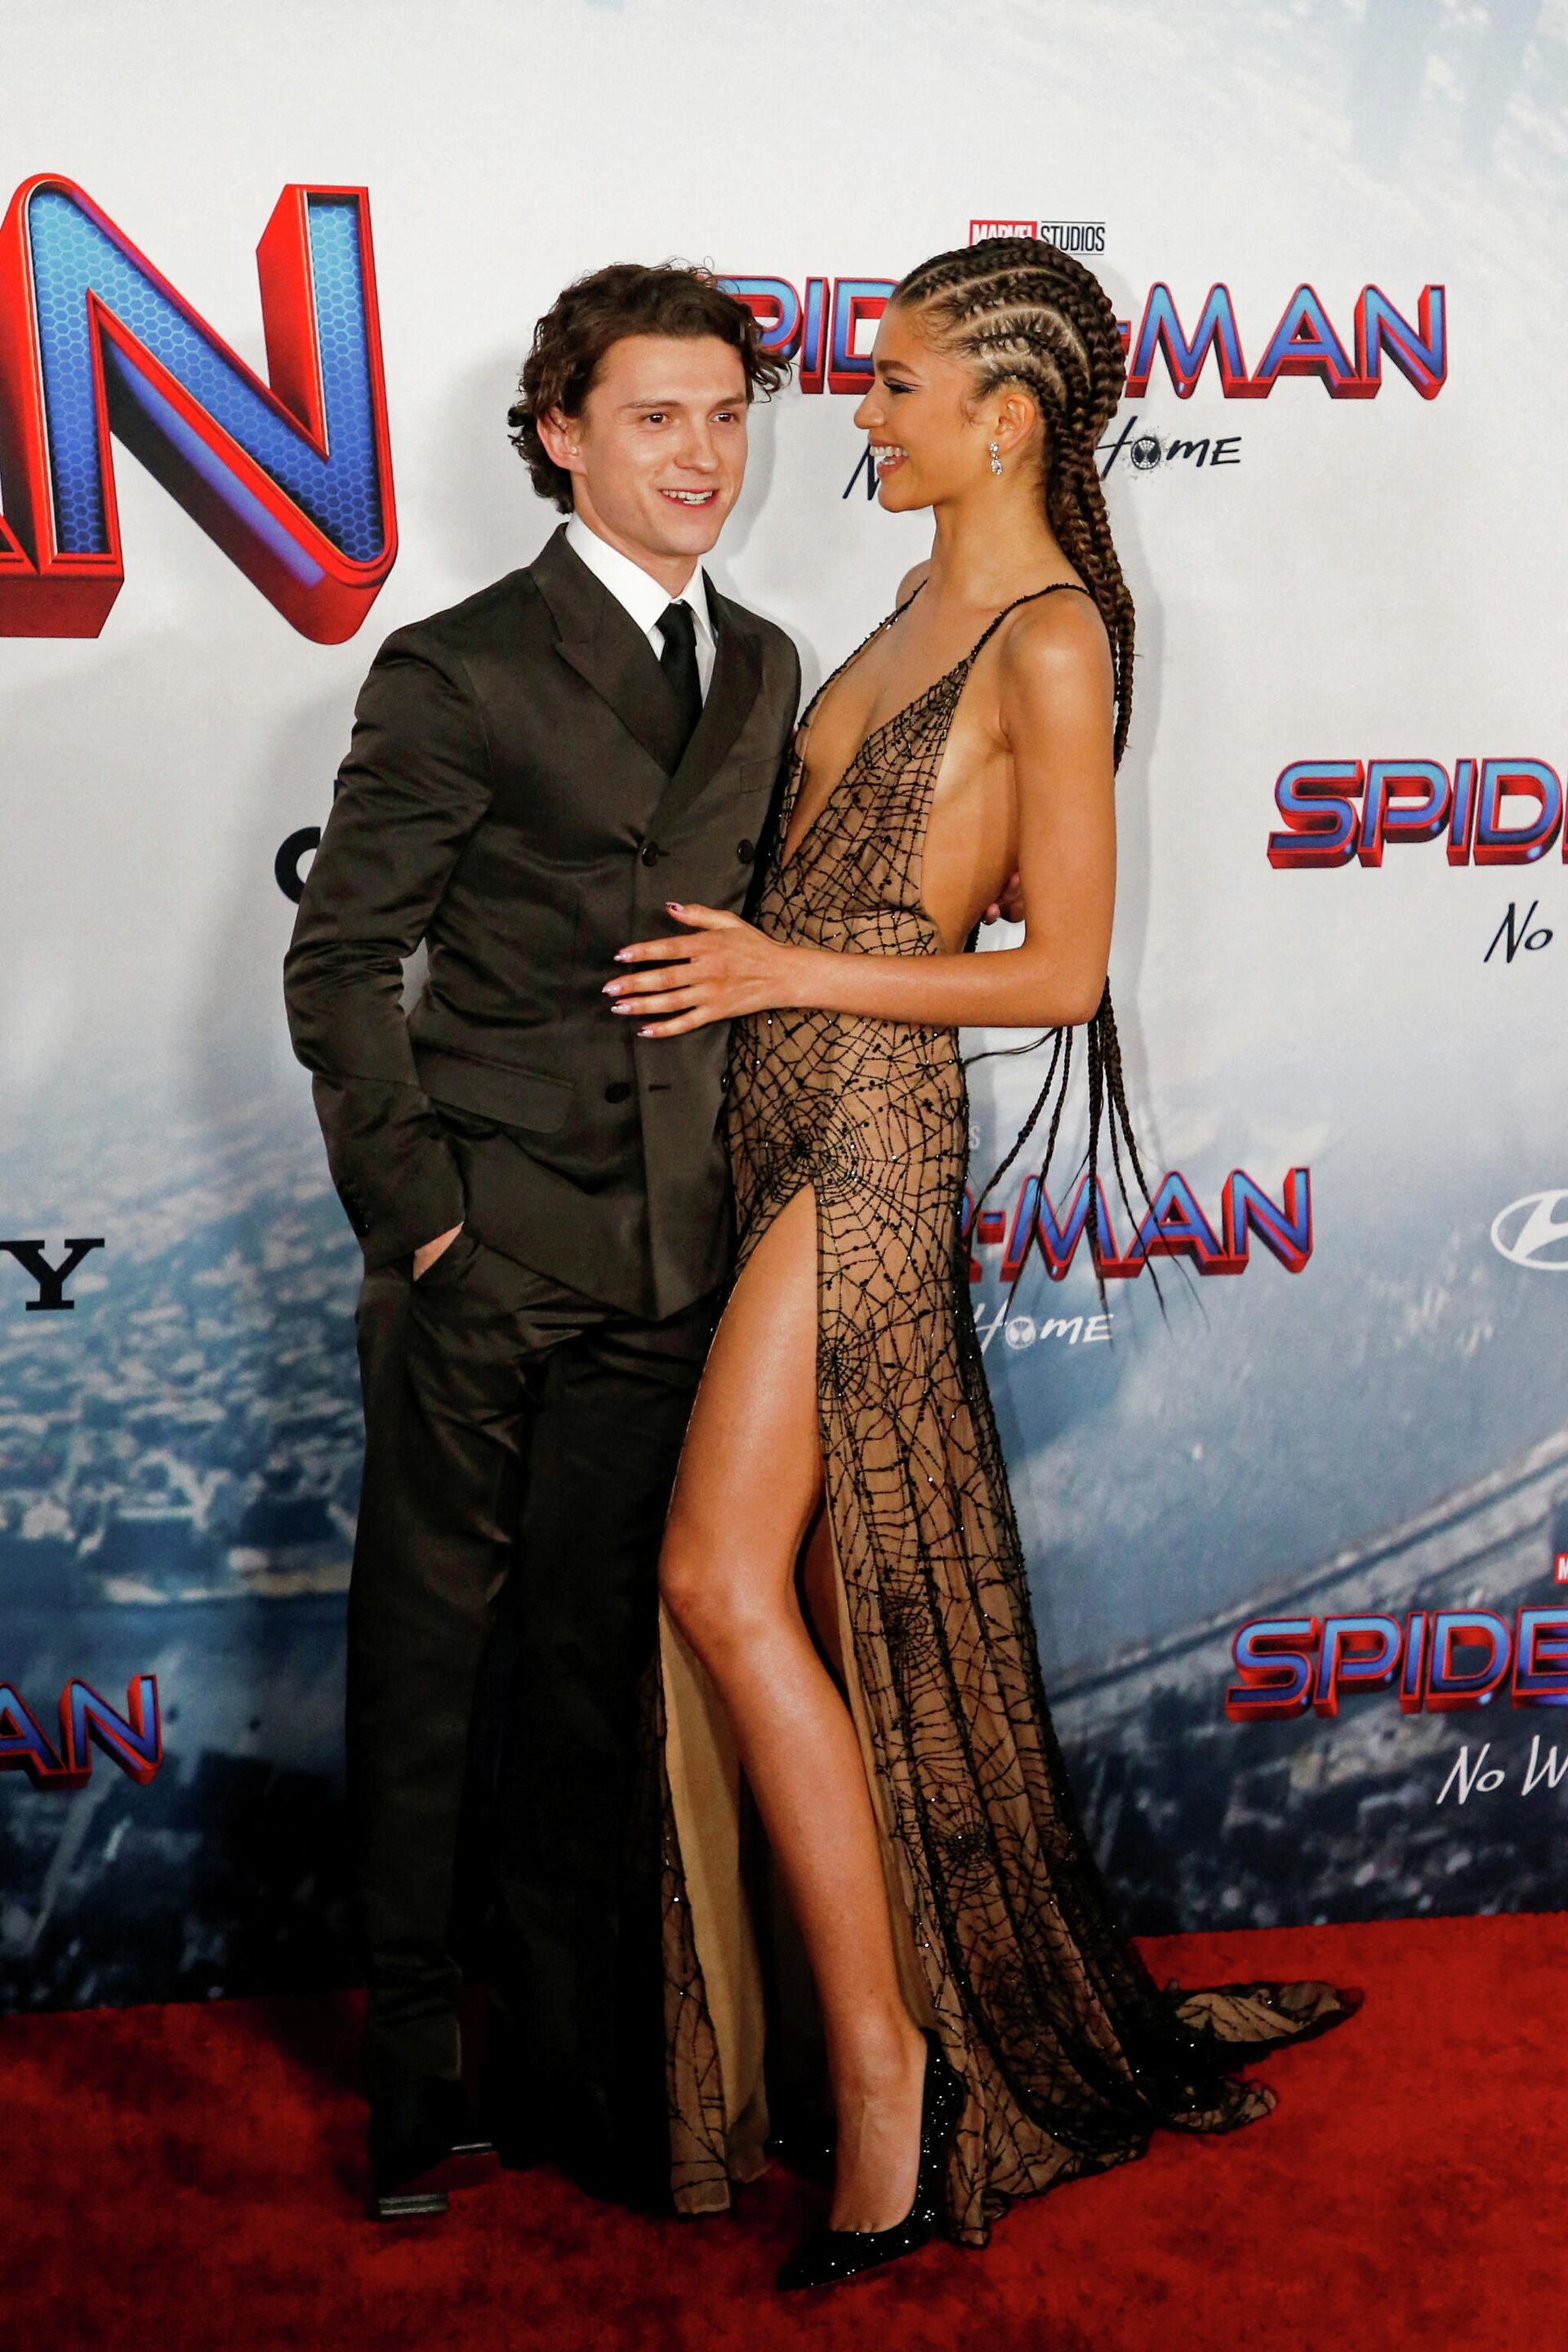  Cast members Tom Holland and Zendaya attend the premiere for the film Spider-Man: No Way Home in Los Angeles, California, December 13, 2021. - Sputnik International, 1920, 23.12.2021